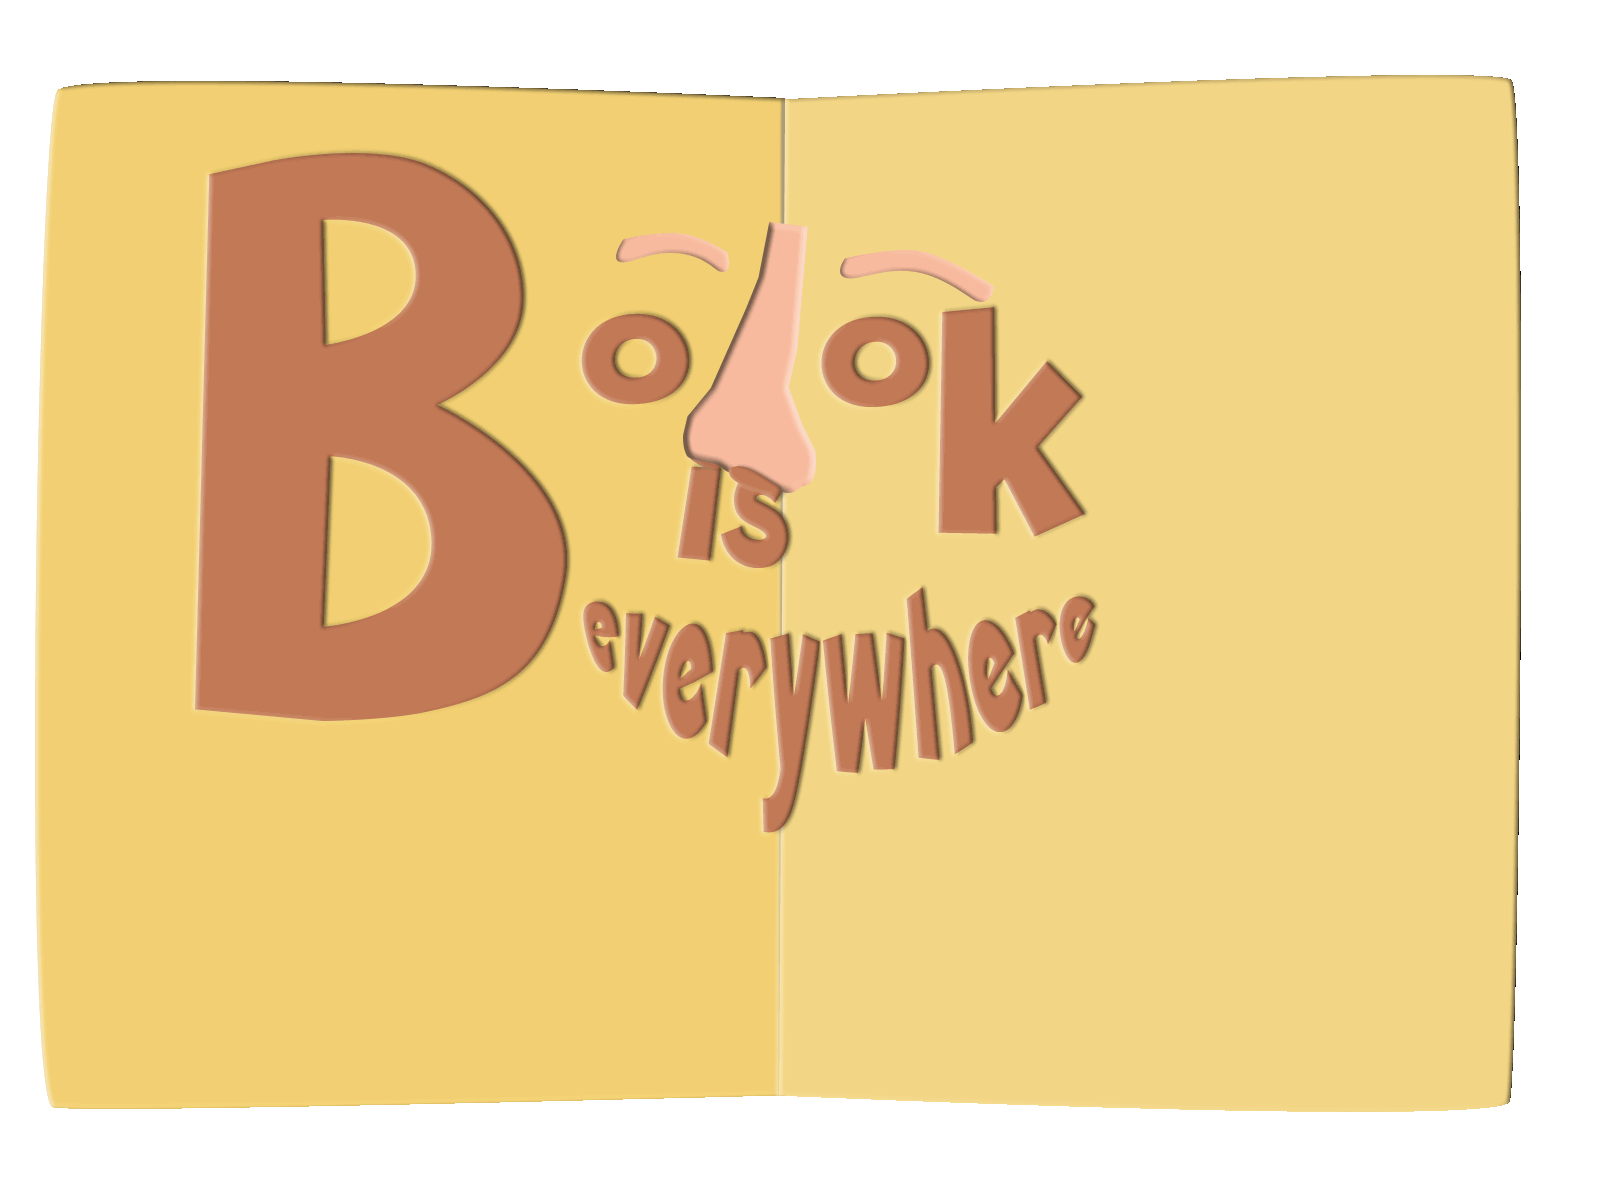 Motion Graphics-Letter B (Book is everywhere)3.29 animated gif animation book design logo motiongraphics photoshop vector